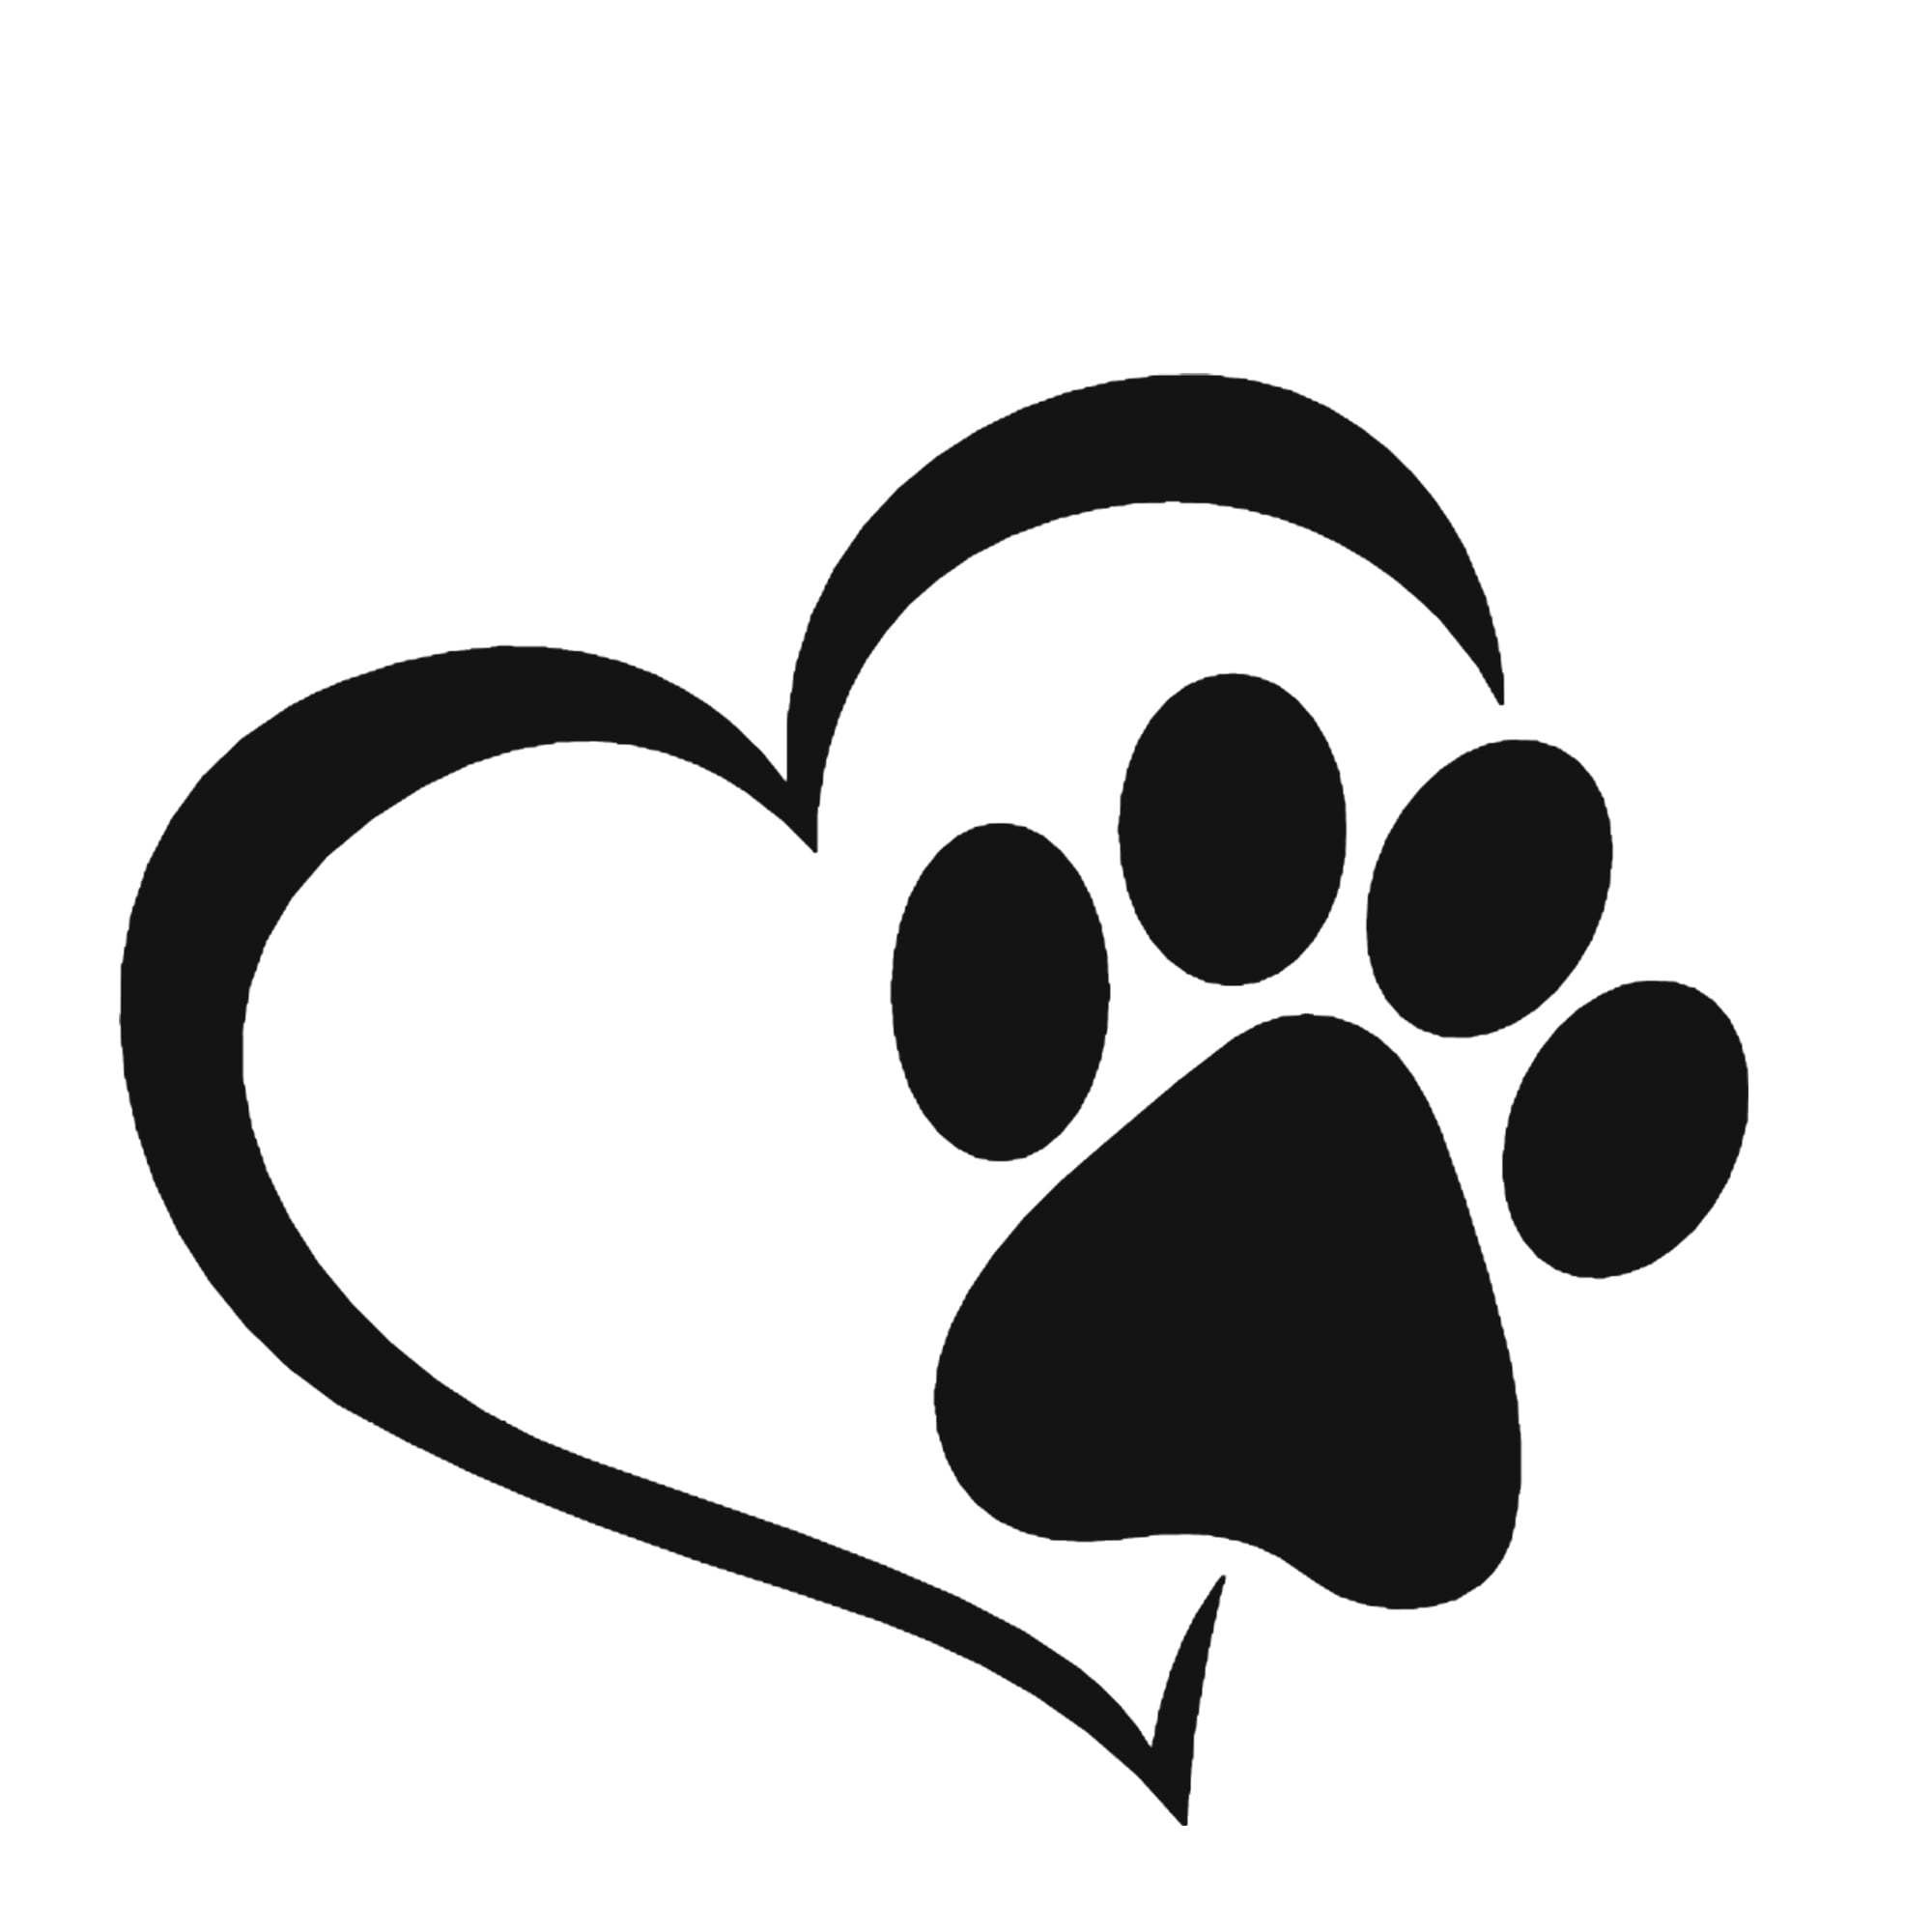 Love paw  VINYL DECAL for home cars walls cups bumper stickers glass truc 